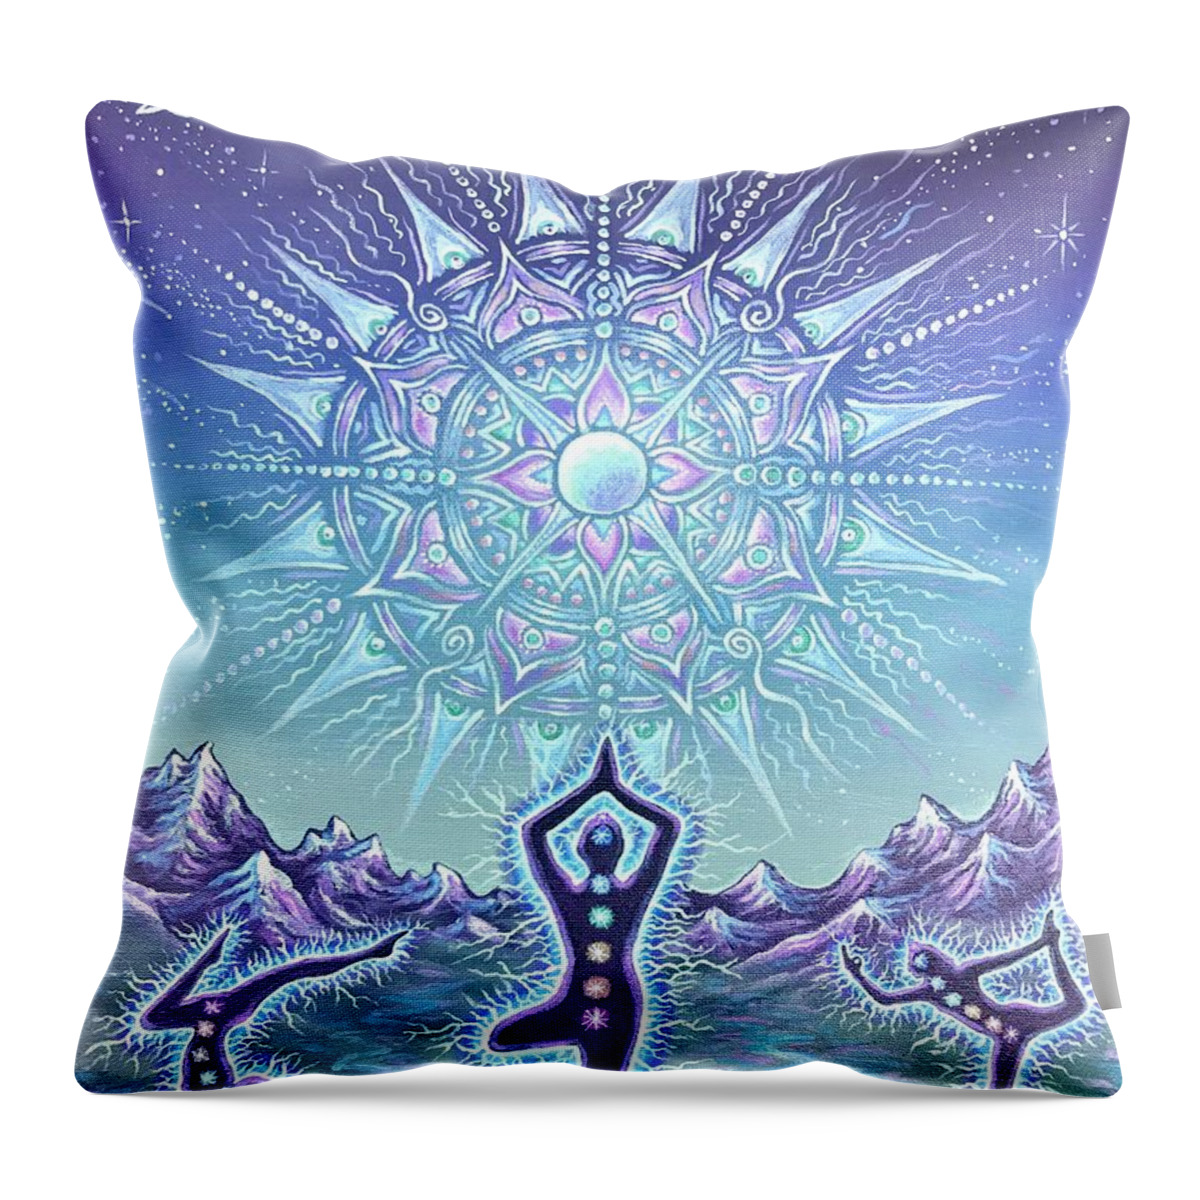 Yoga Throw Pillow featuring the painting Electric Yoga Flow by Jim Figora